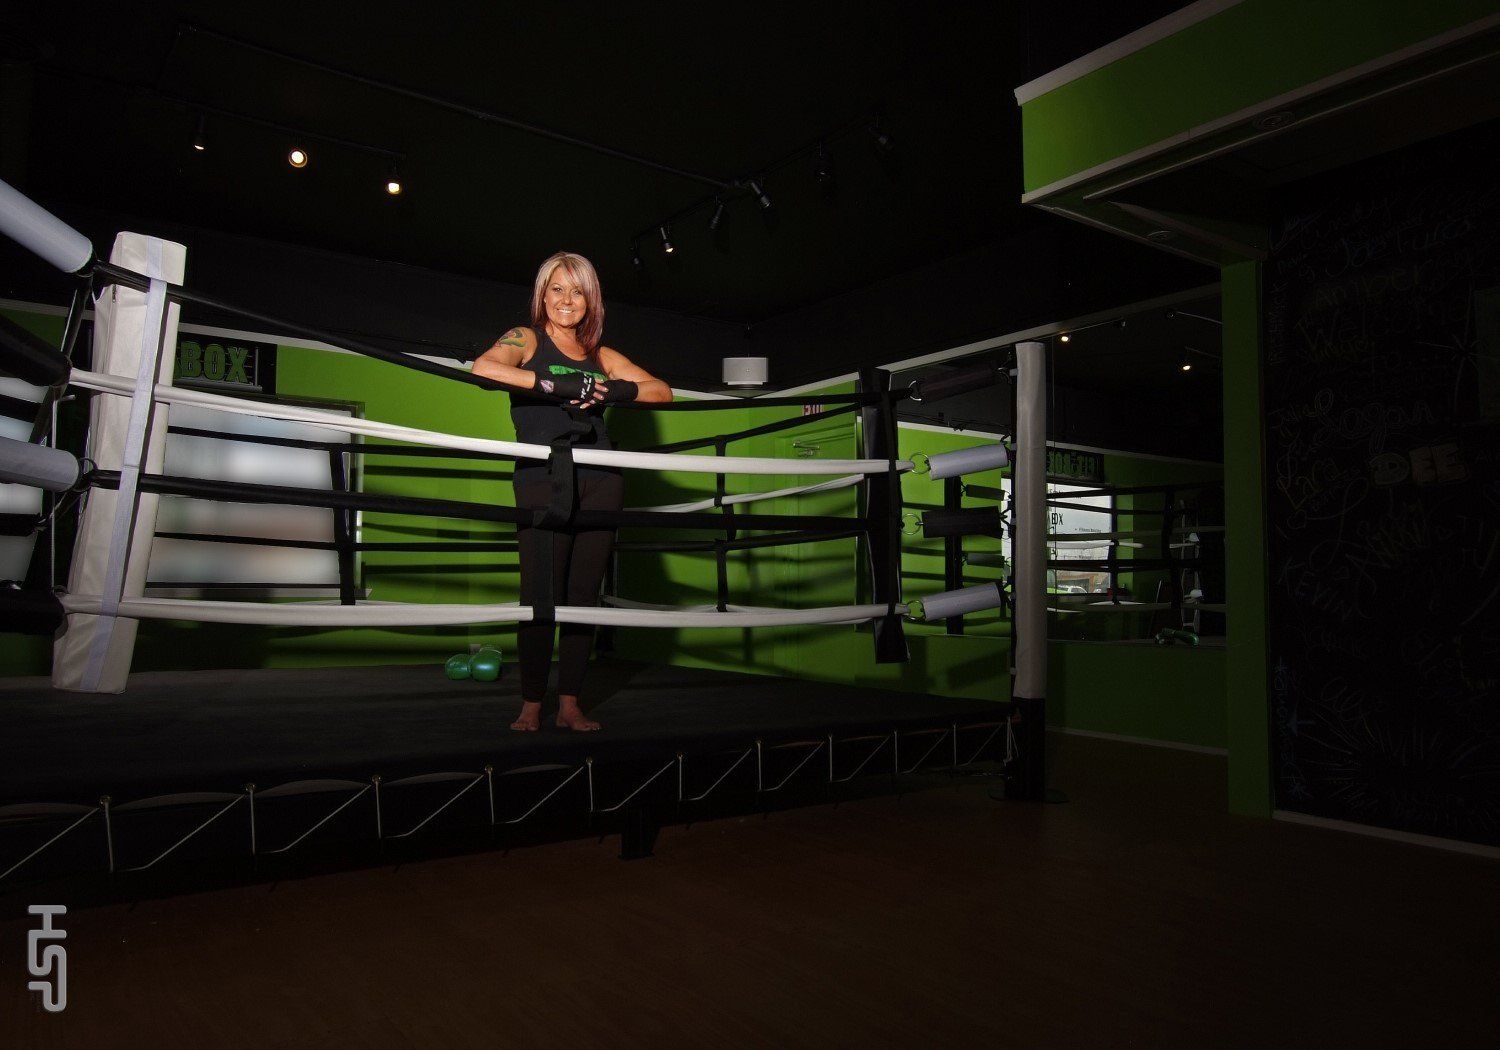 Christa Founder & Owner of The Fit Box Gym